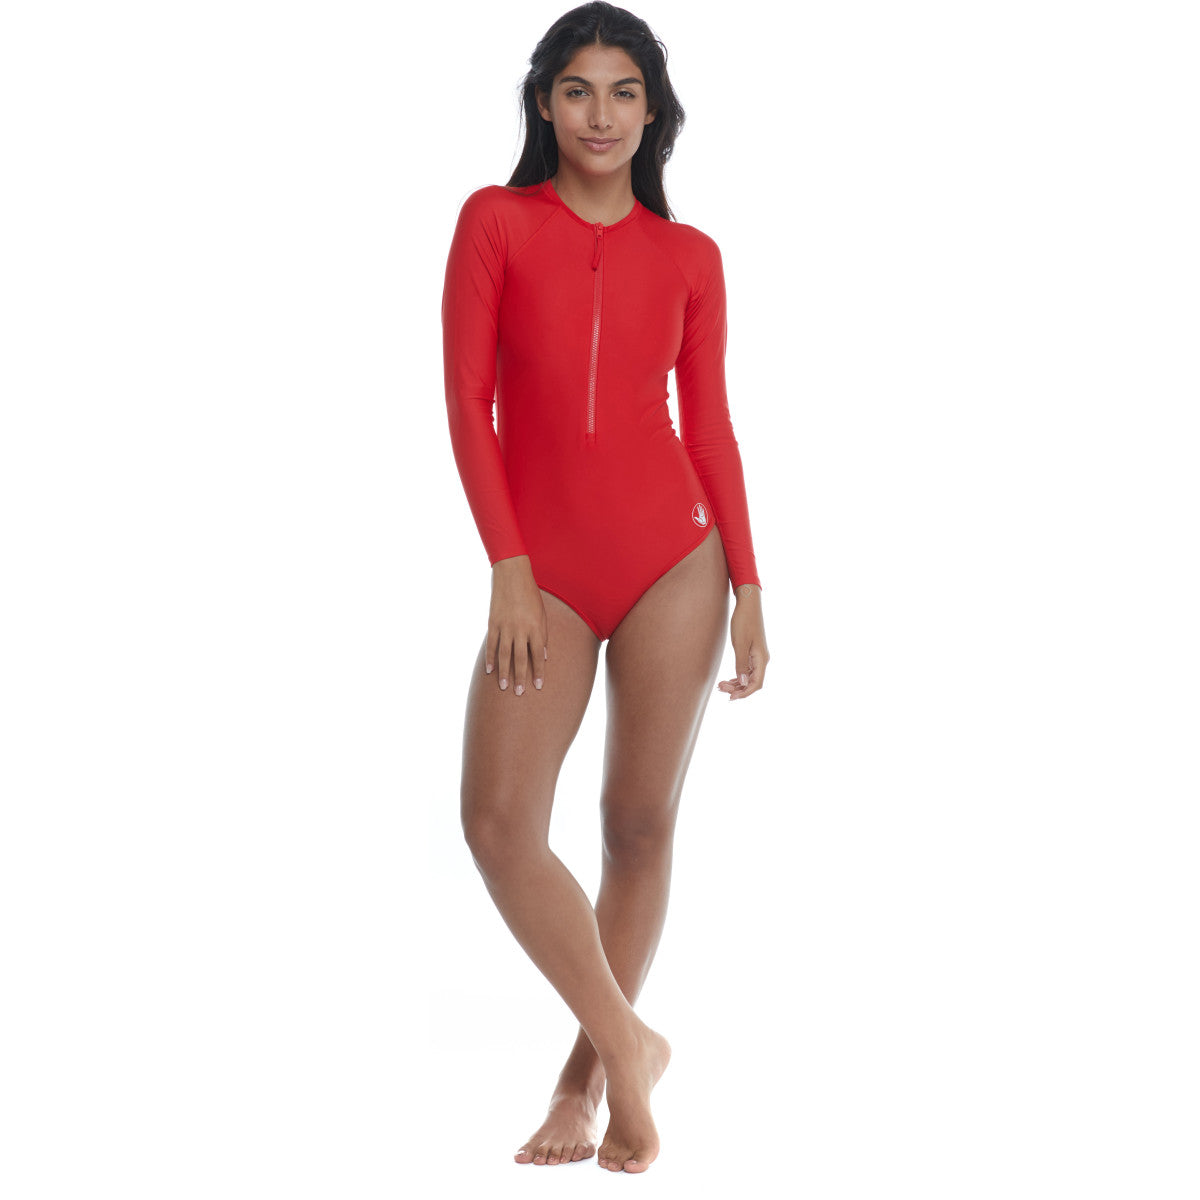 SMOOTHIES CHANEL PADDLE SUIT